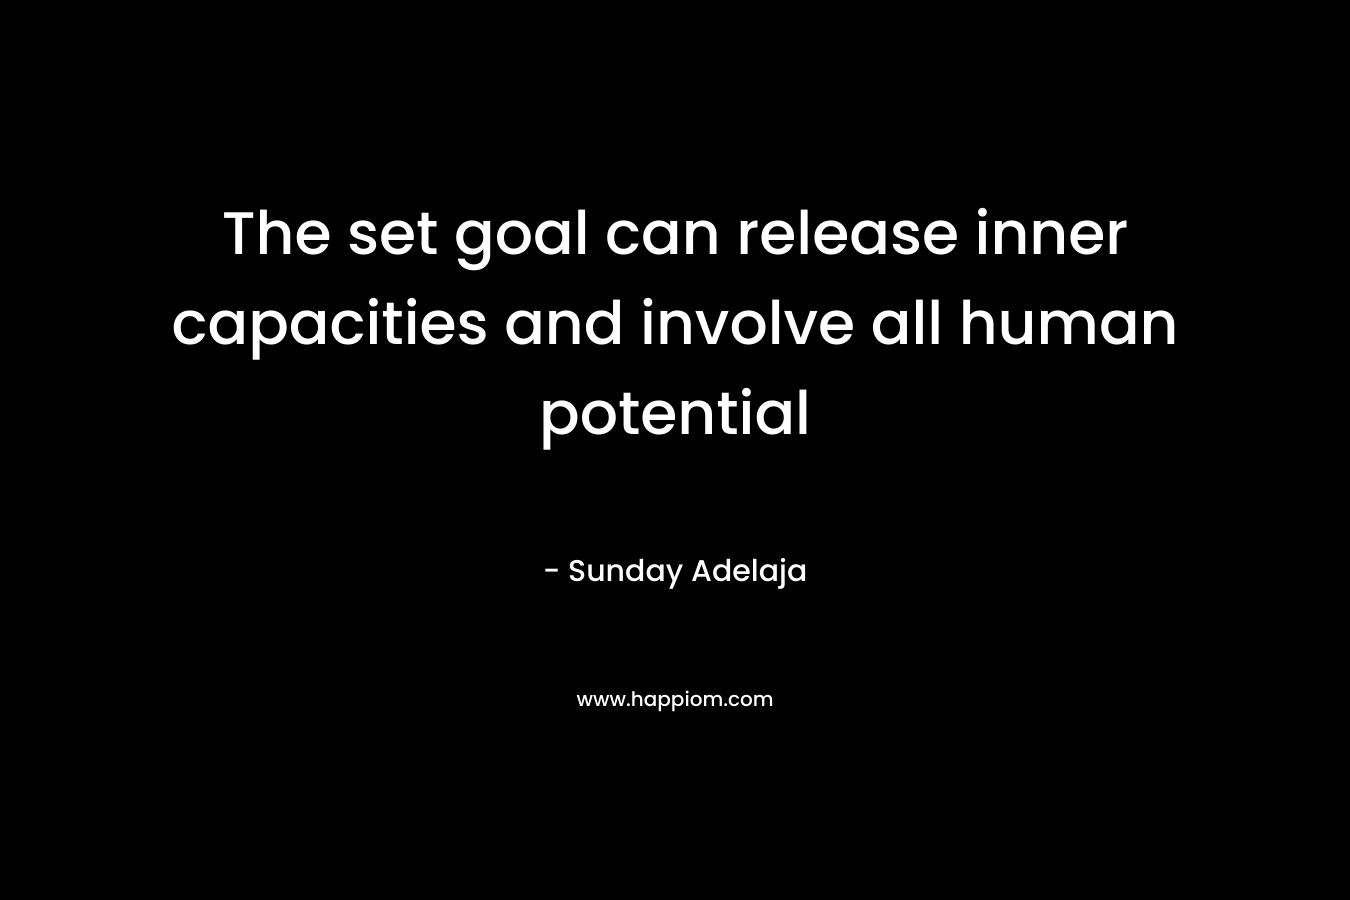 The set goal can release inner capacities and involve all human potential – Sunday Adelaja